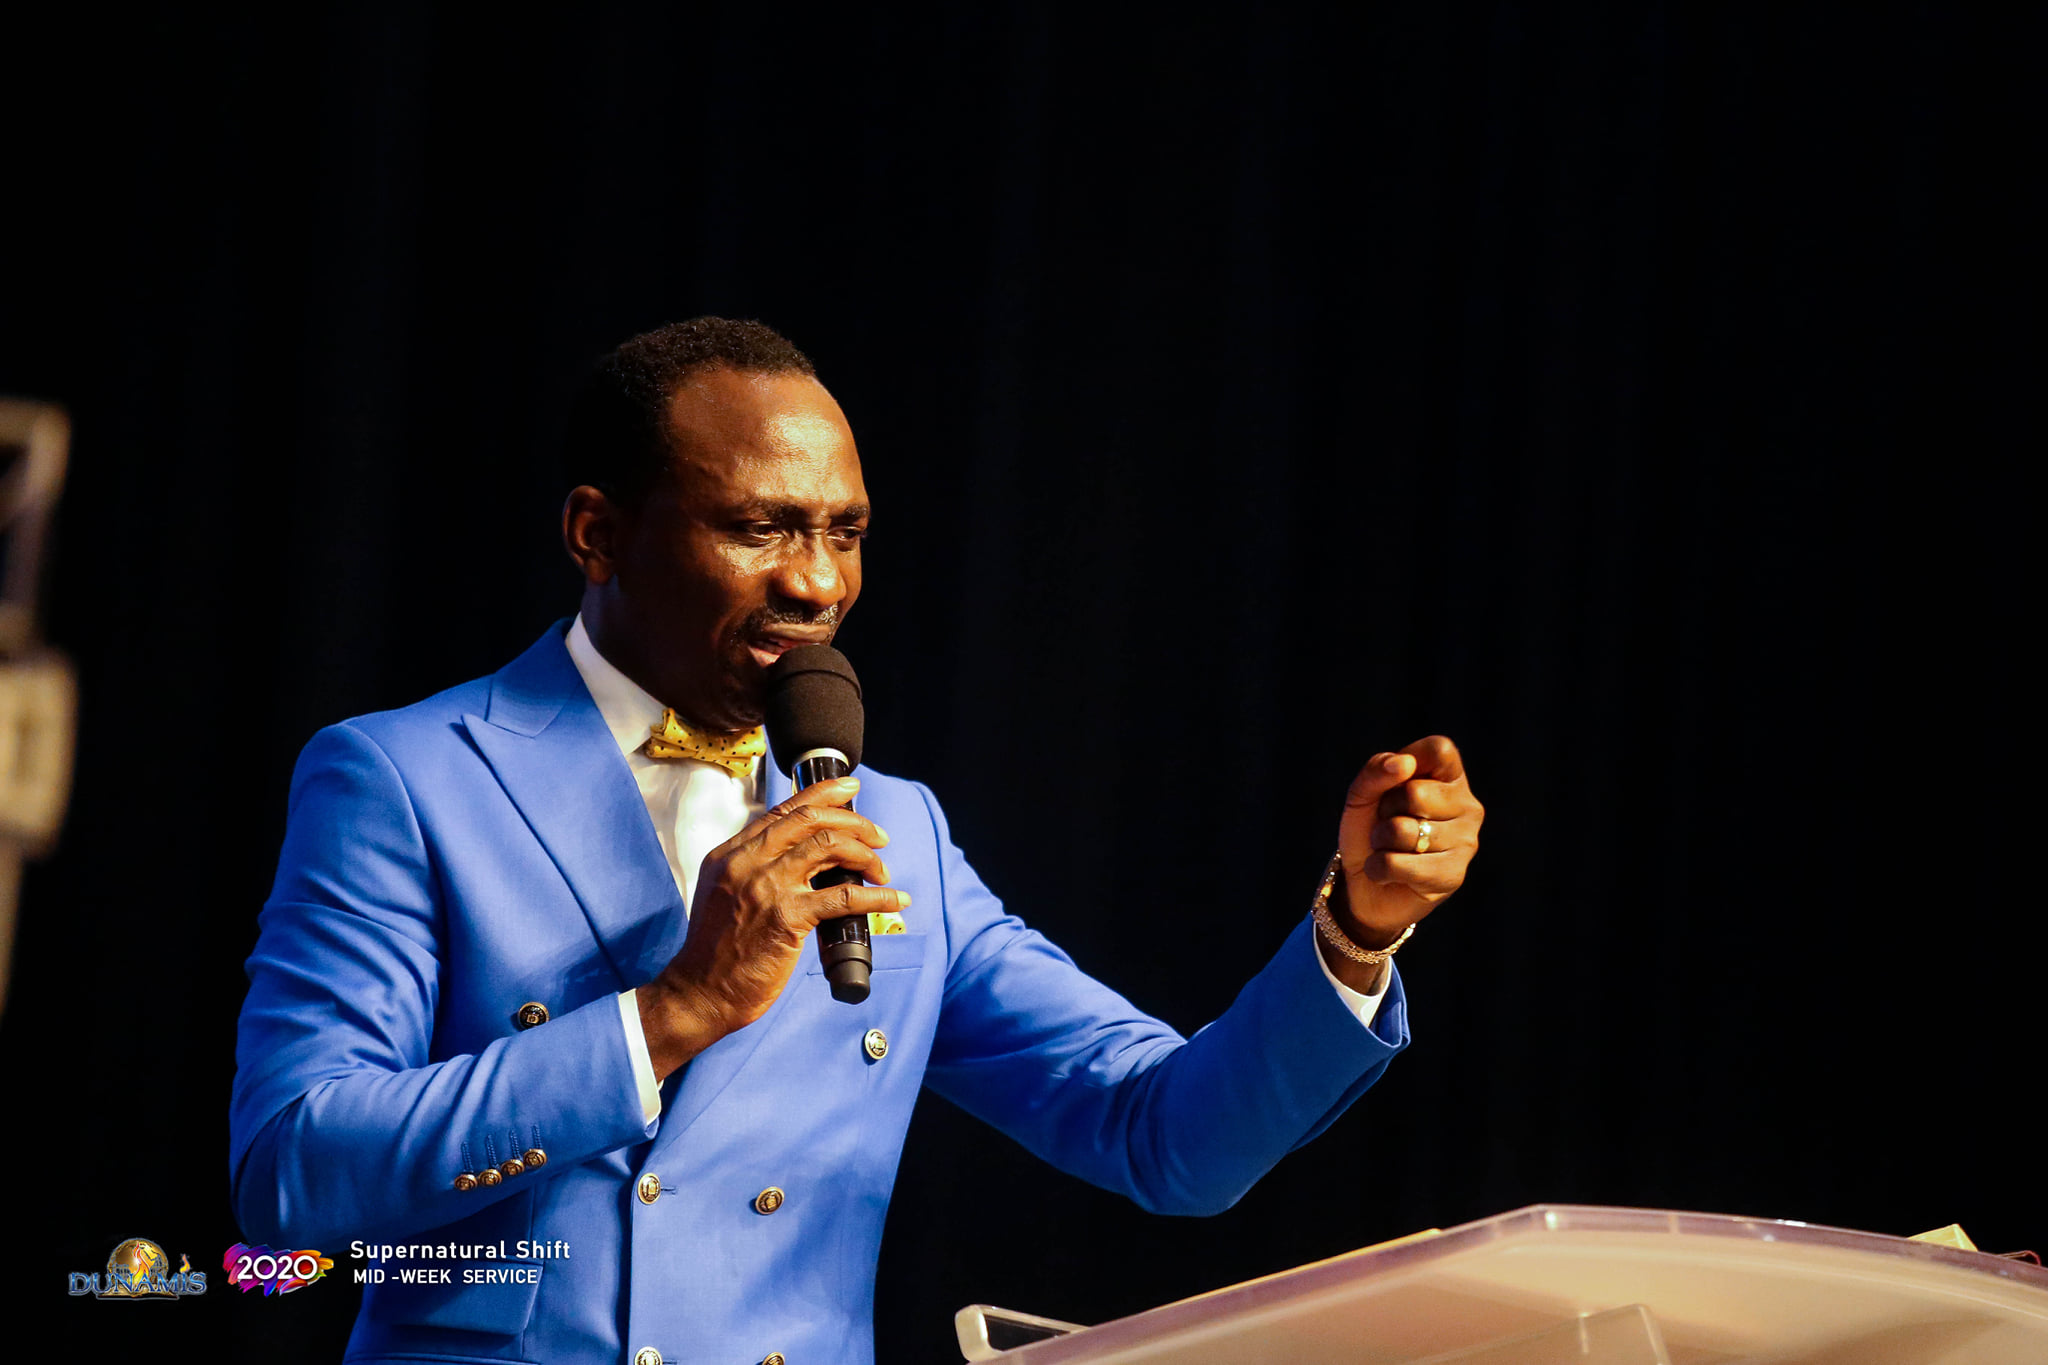 The Pathway of Joy mp3 by Dr Paul Enenche